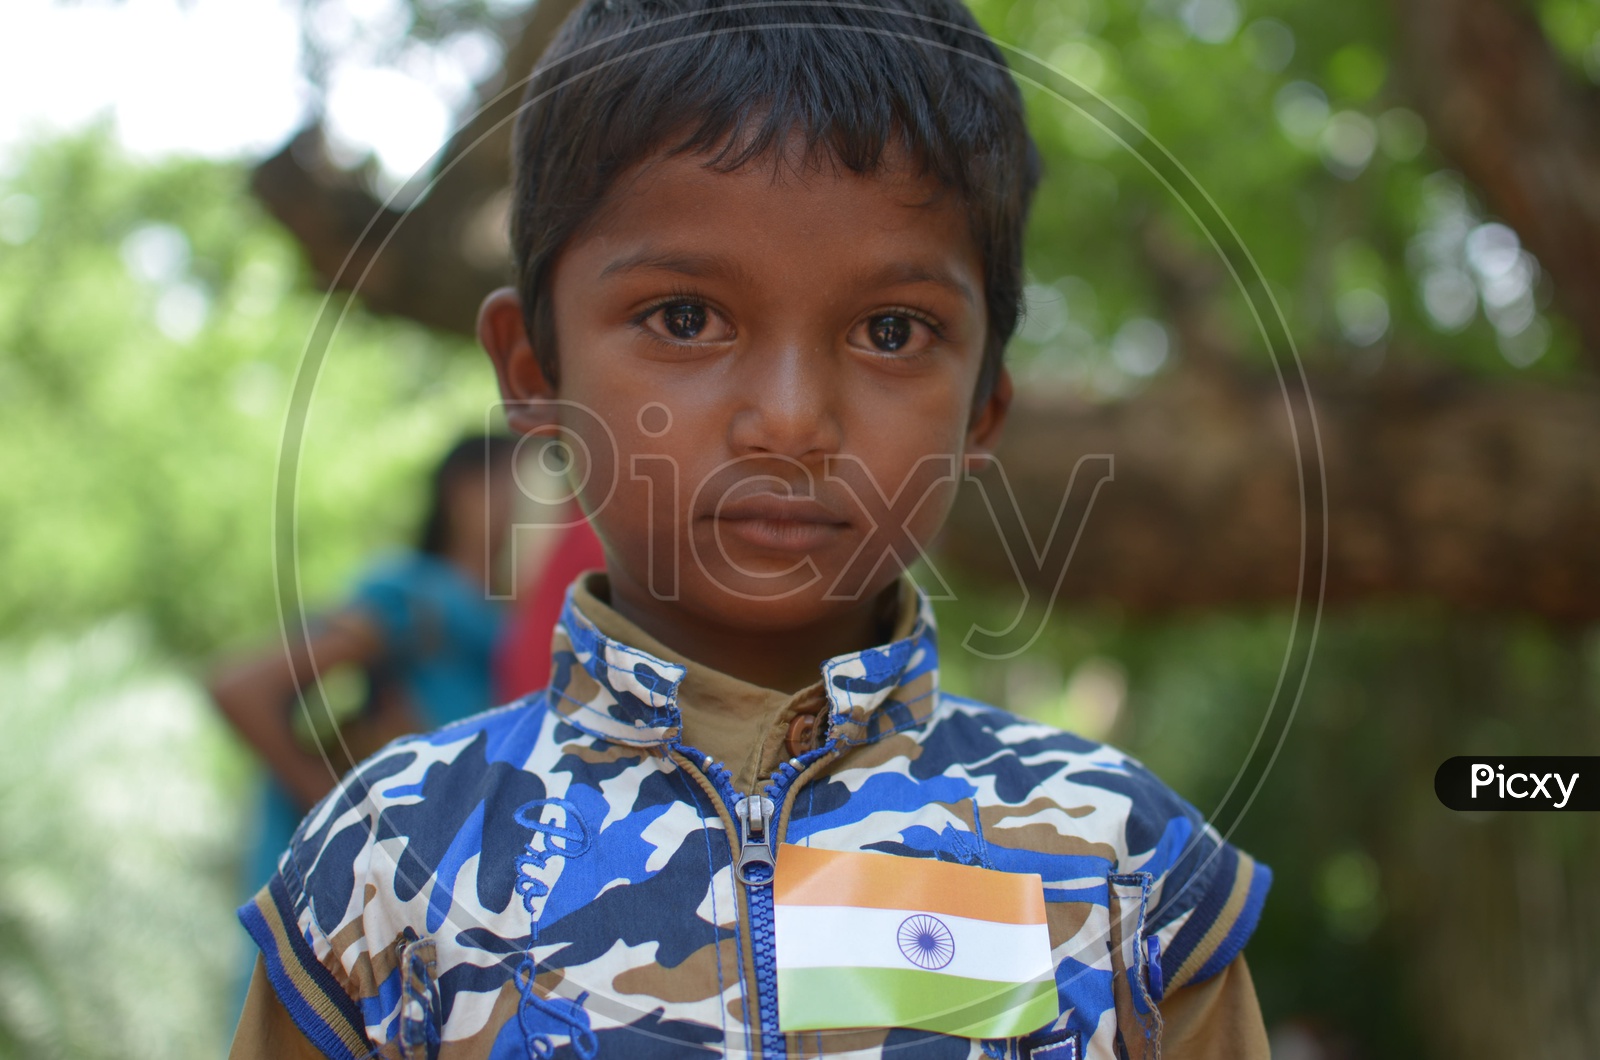 Boy  child smiling face / Indian Children Smiling Faces / Childrens Wearing Indian Flag on Indipendence Day